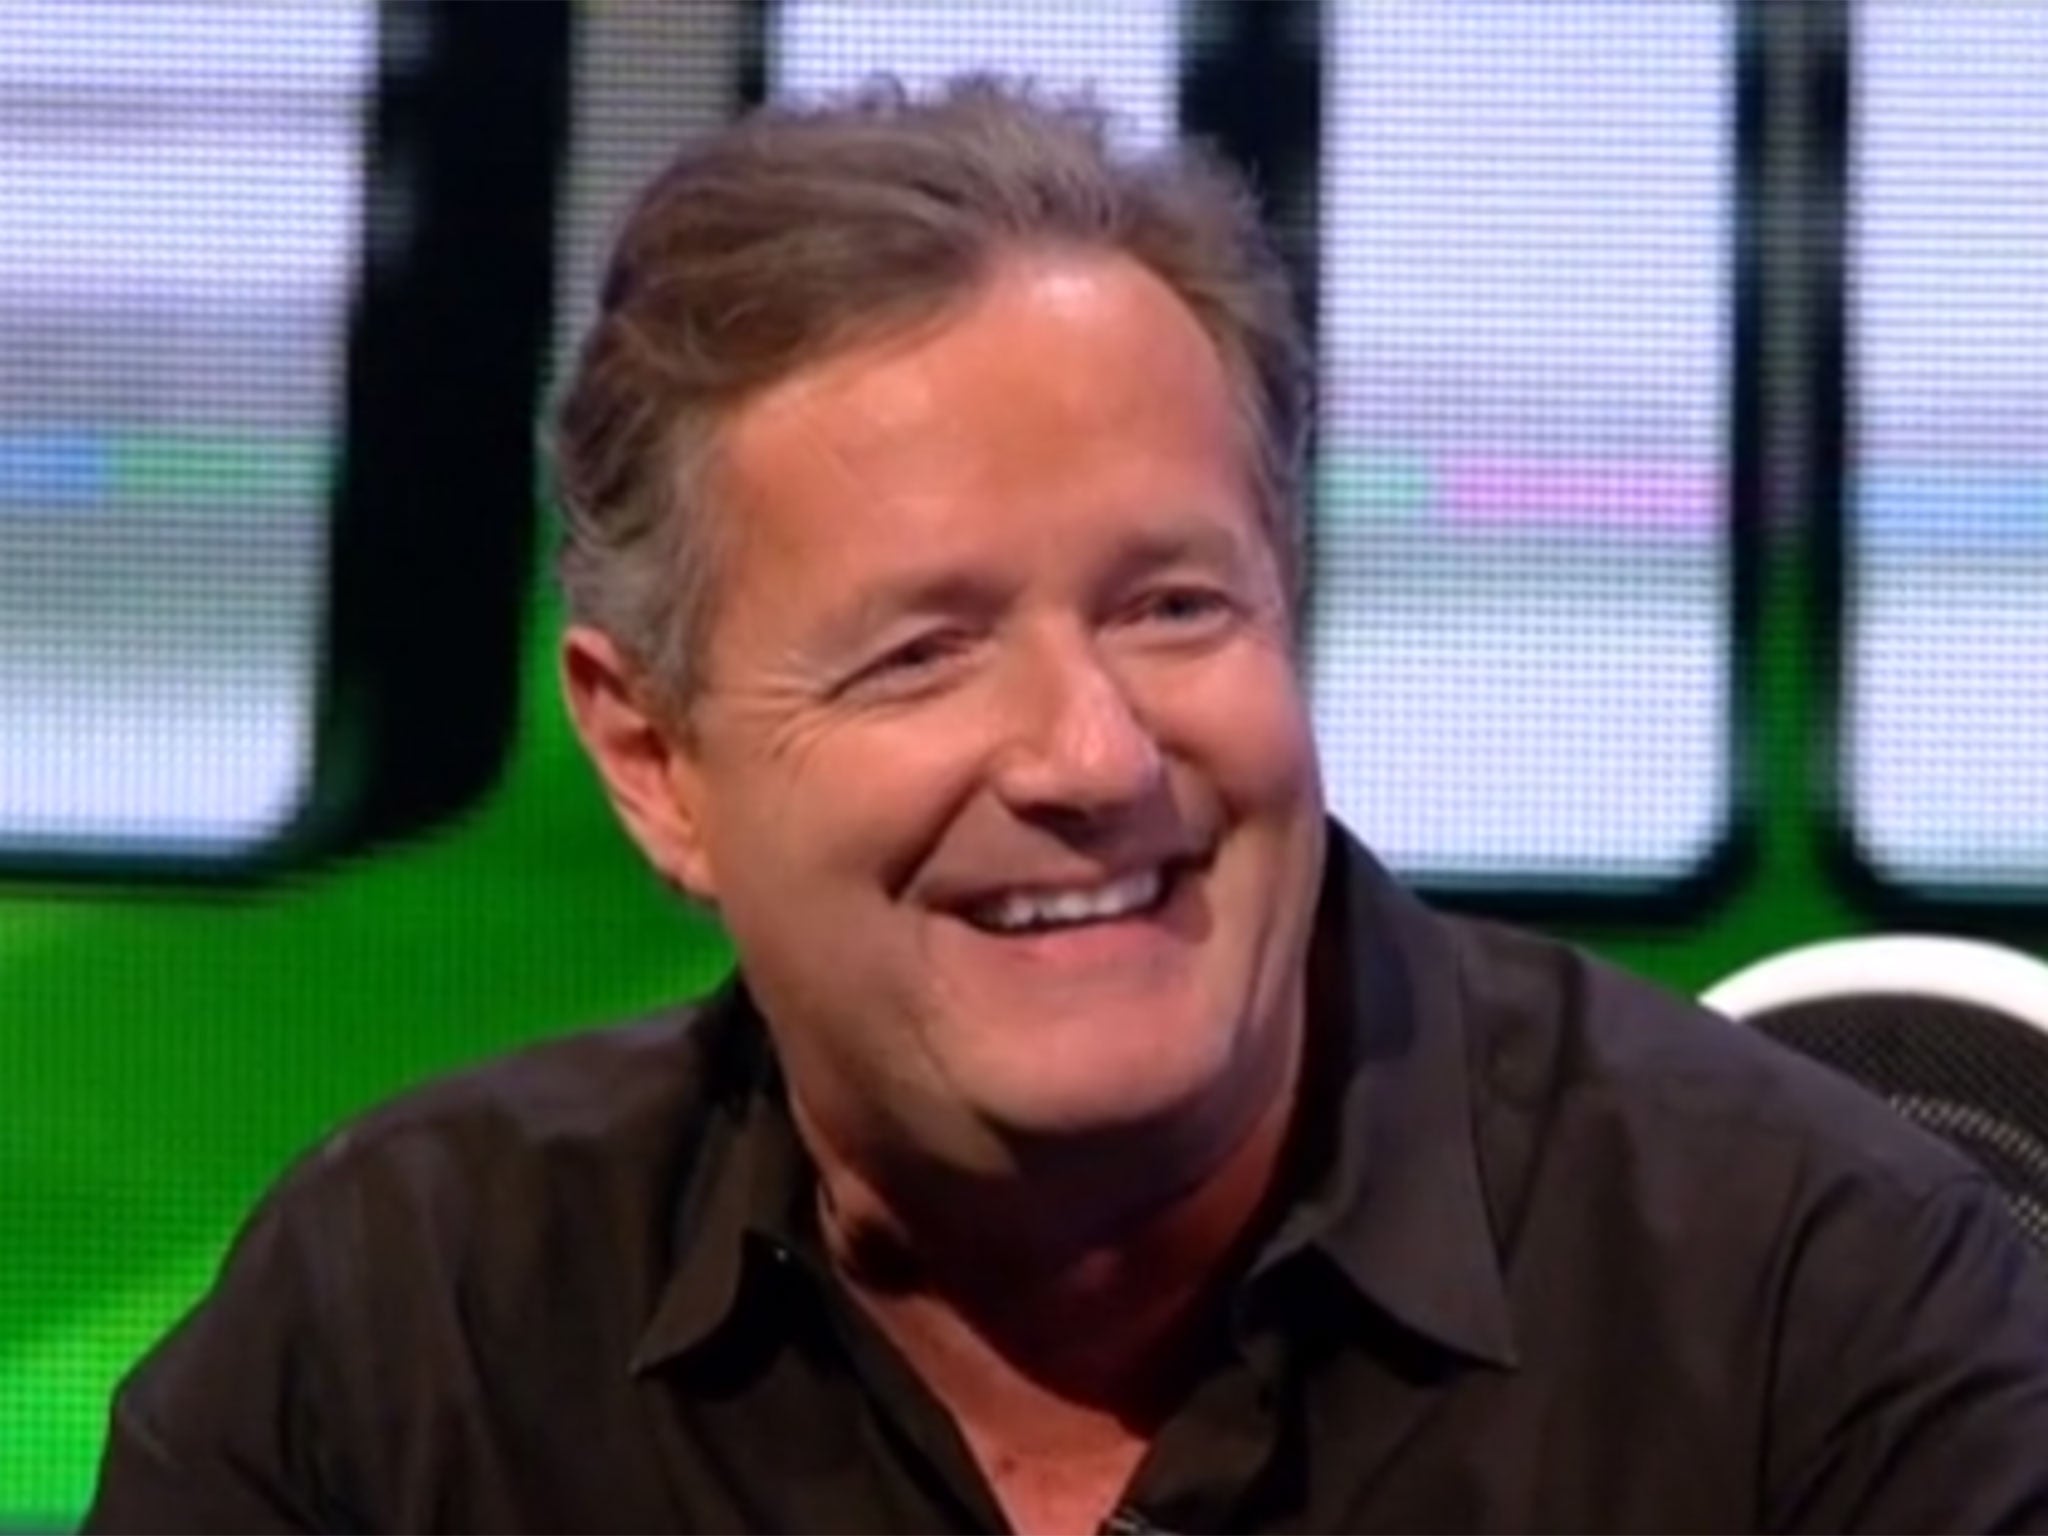 Piers Morgan telling all about that Jeremy Clarkson punch on Play to the Whistle